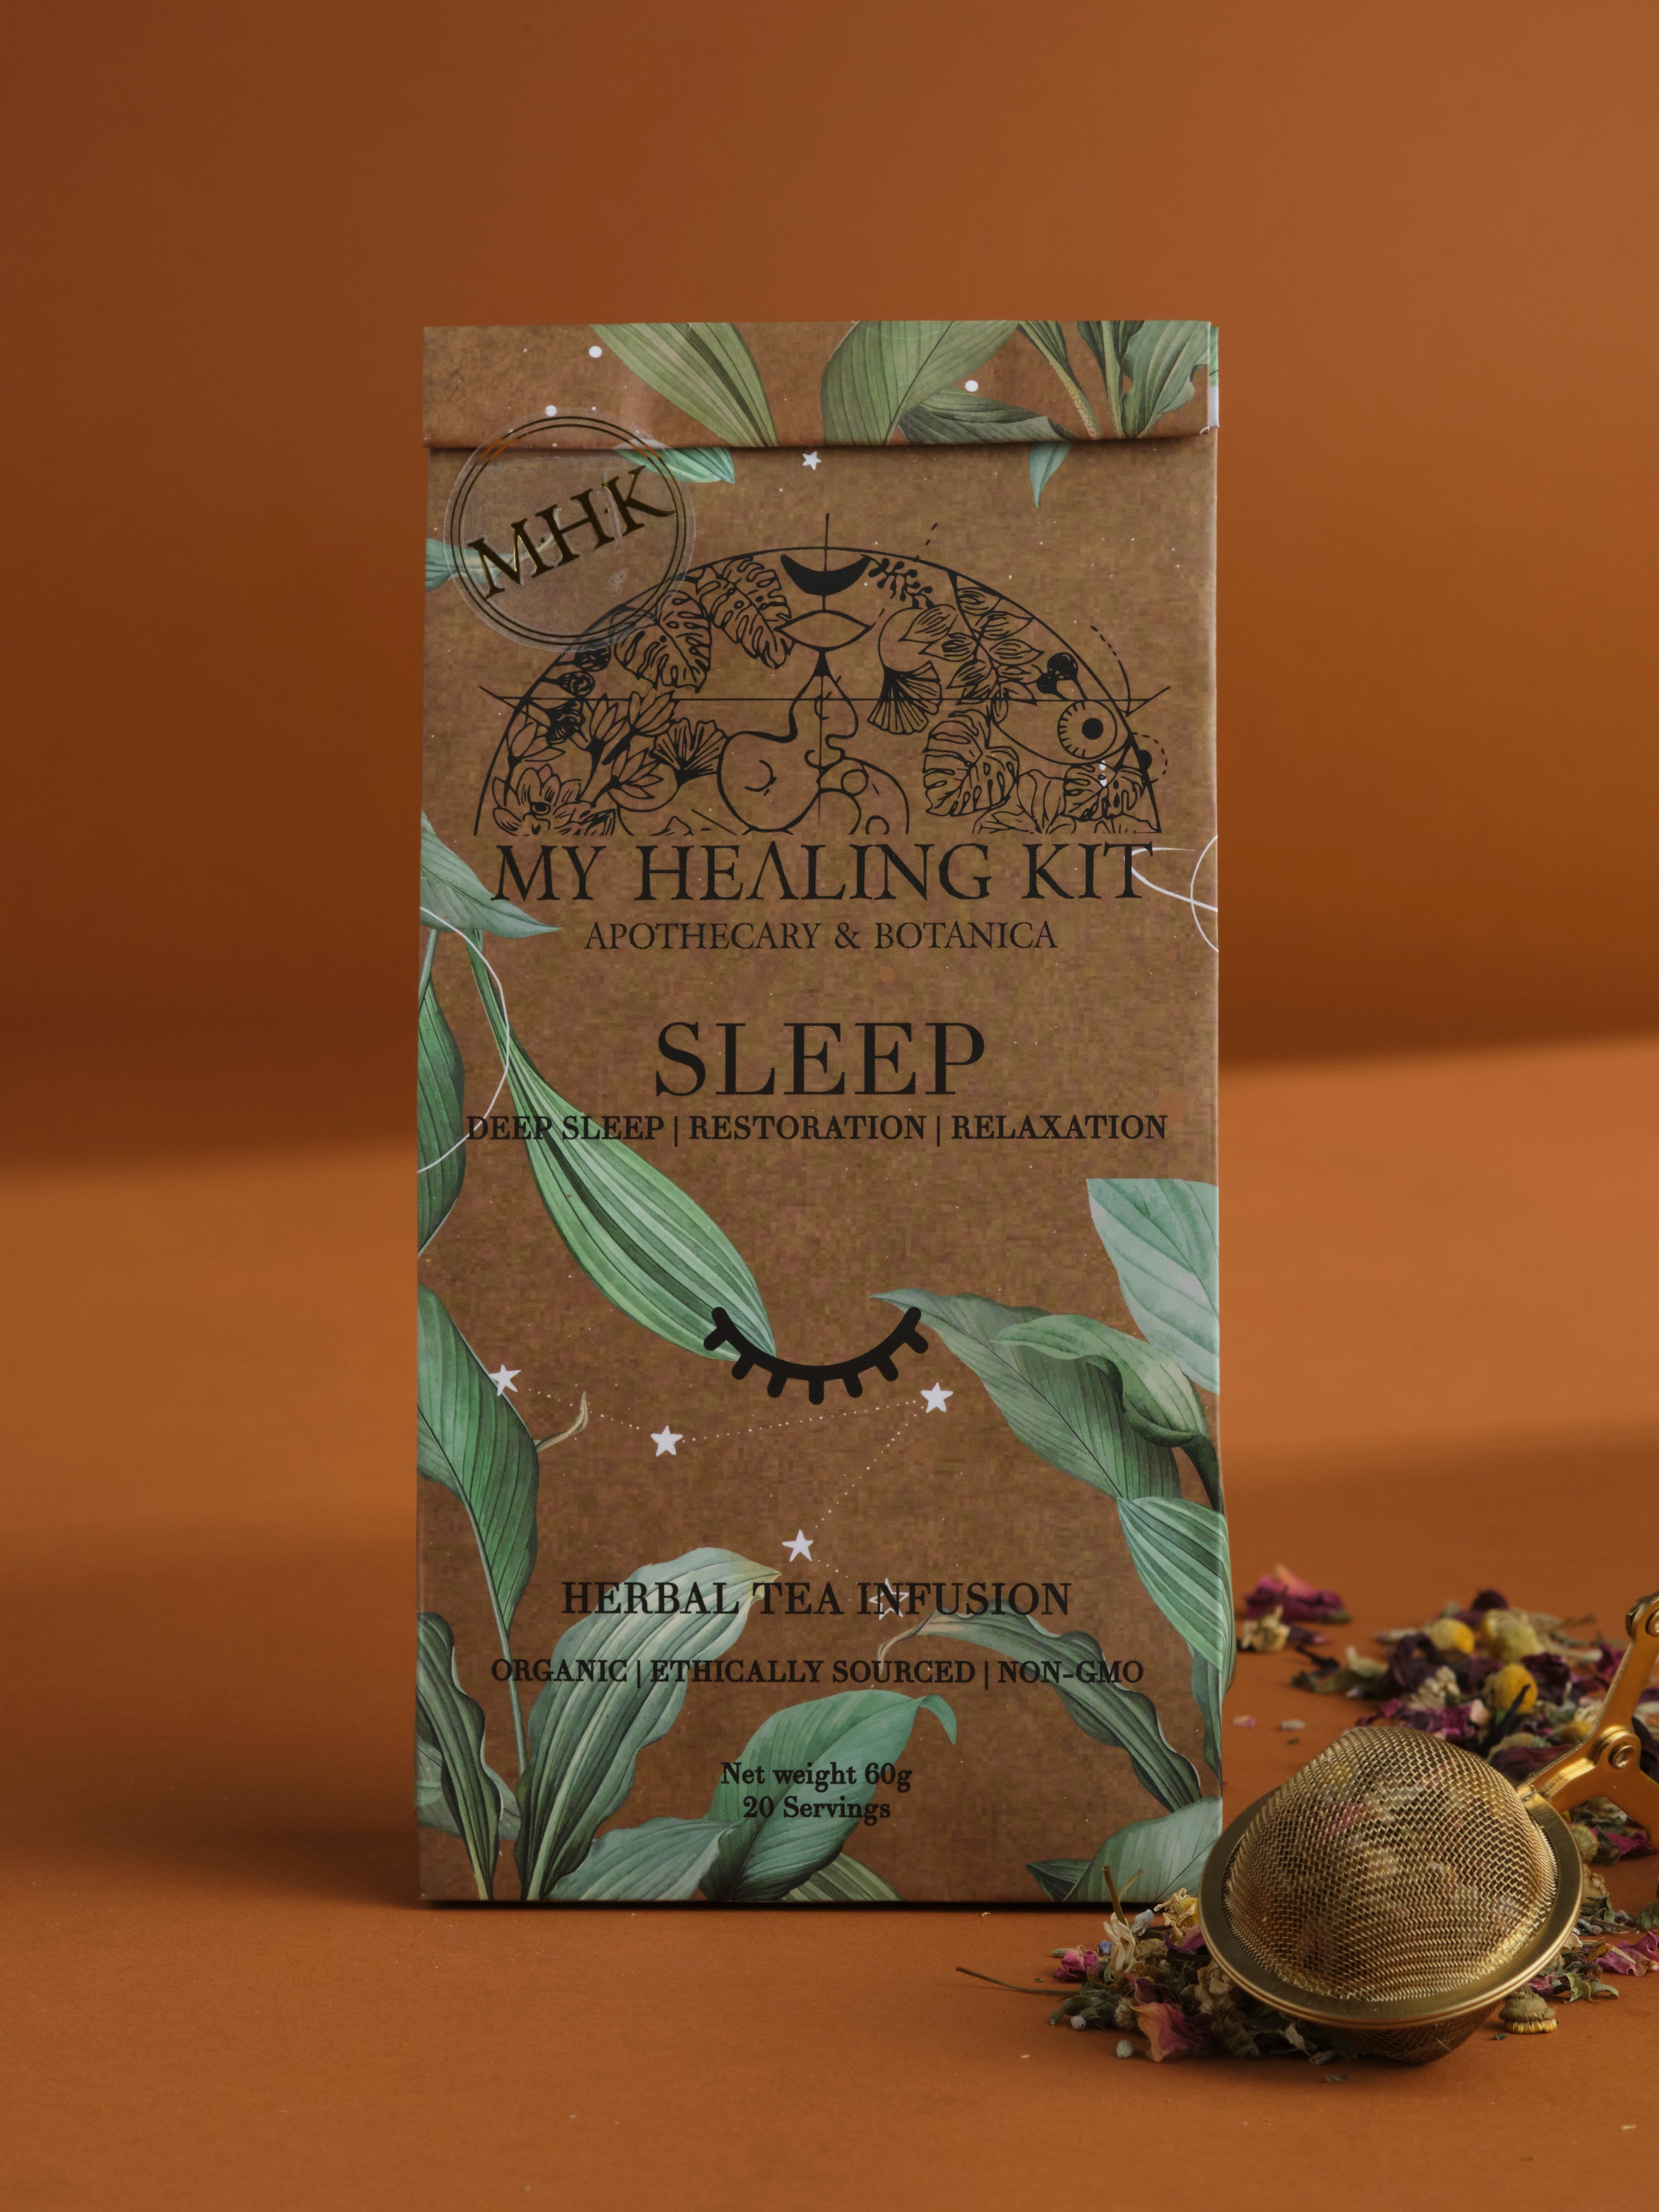 My Healing Kit's Herbal Blends Collection. A mix of fragrant and medicinal plants are combined in these herbal blends for wellbeing and relaxation